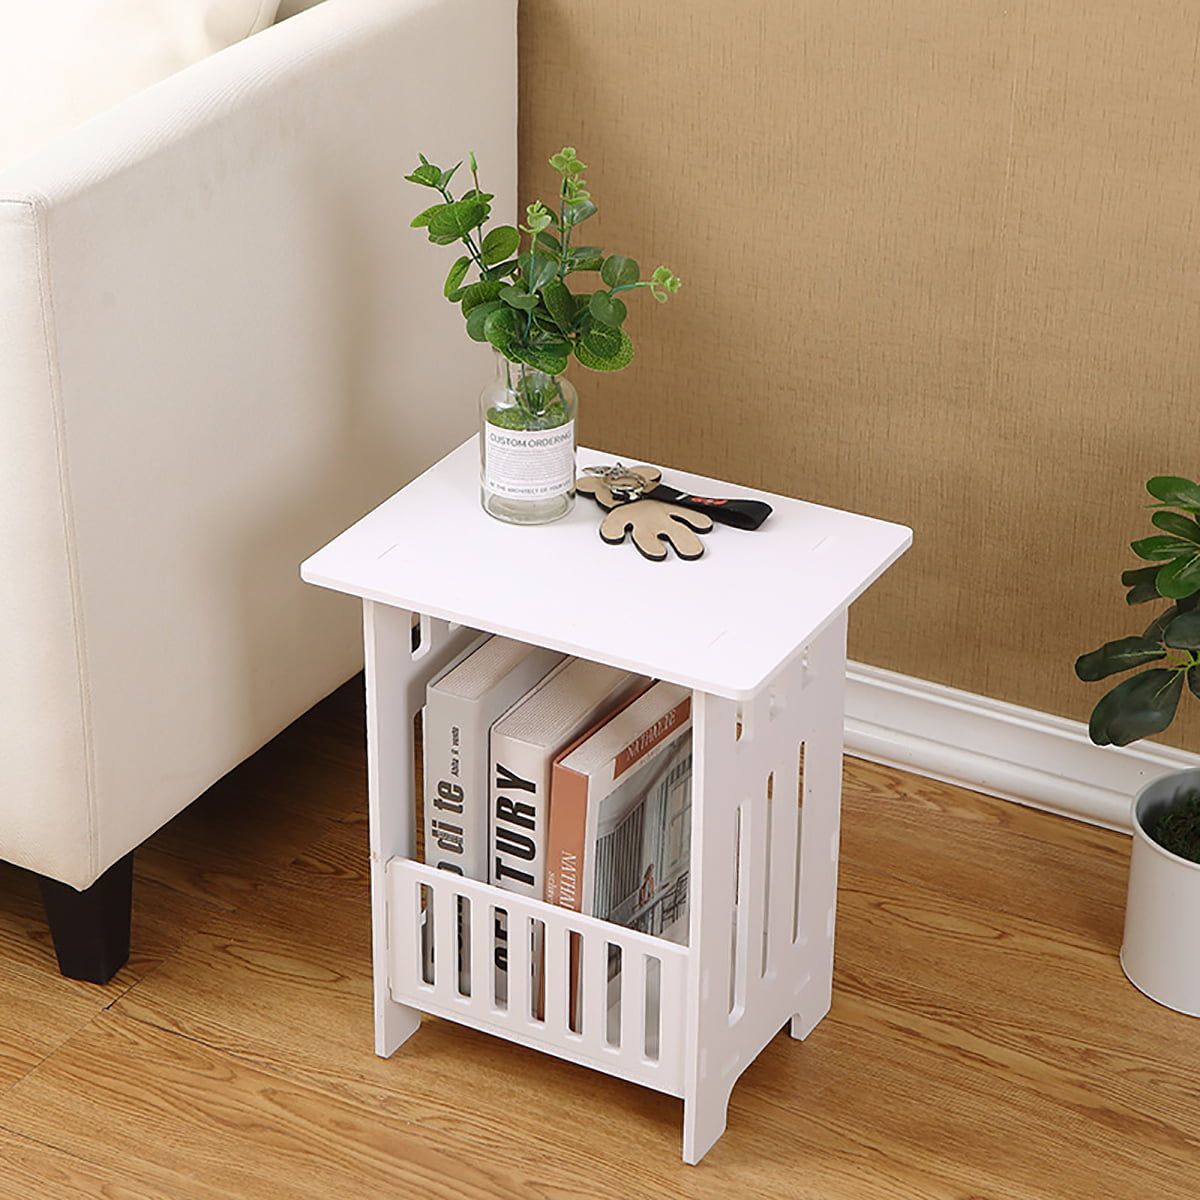 White Modern Bedside Table Bedroom Nightstand End Table Plant Stand Holder  Storage Rack Organizer – Walmart With Regard To Plant Stands With Side Table (View 11 of 15)